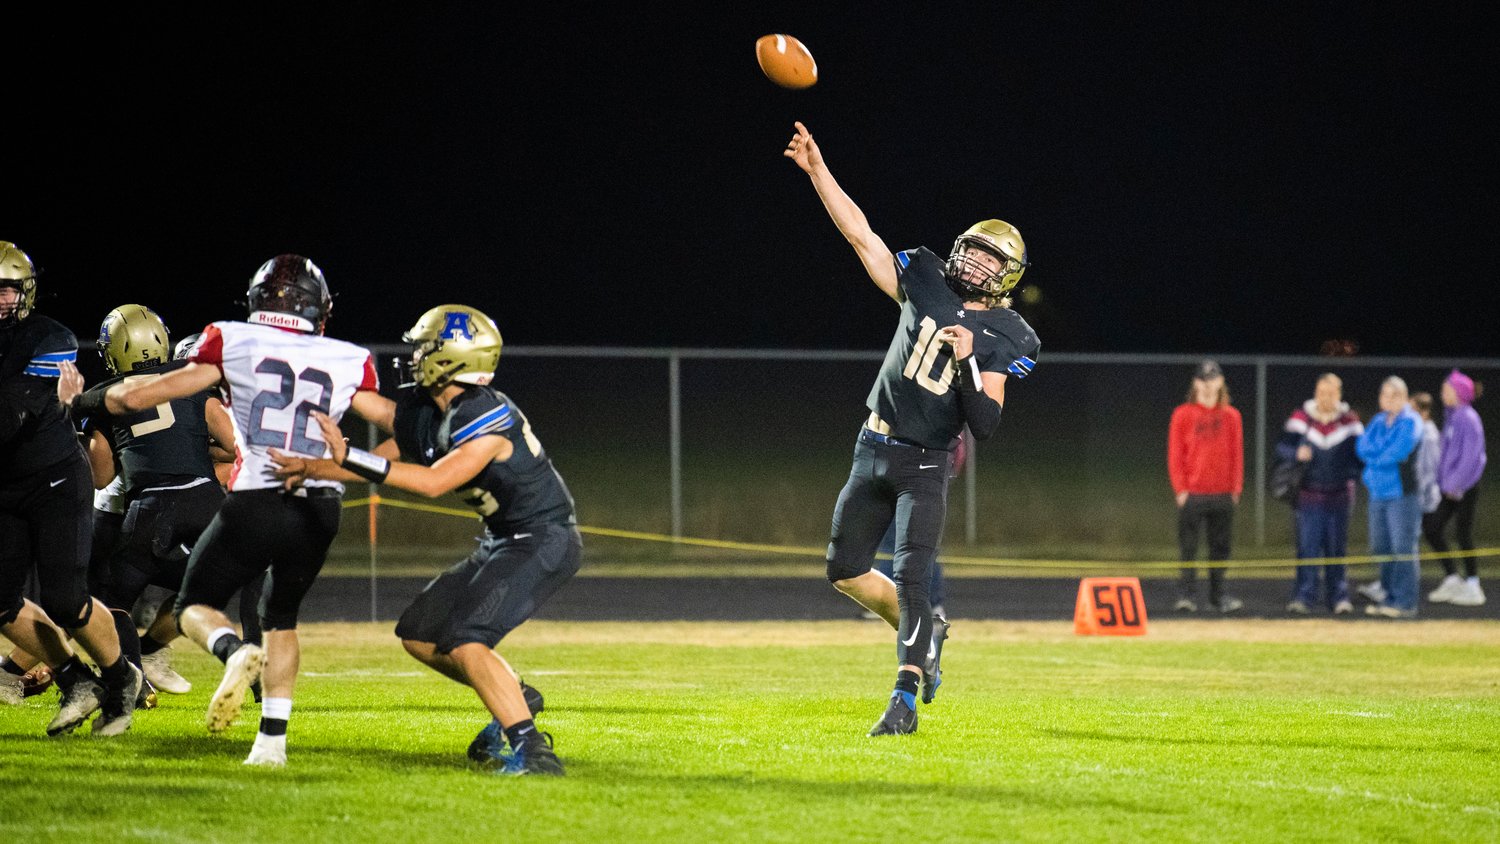 Adna junior Lane Johnson (10) launches a pass toward the end zone during a game against Toledo Friday night at Pirate Stadium as cars line up for homecoming royalty.